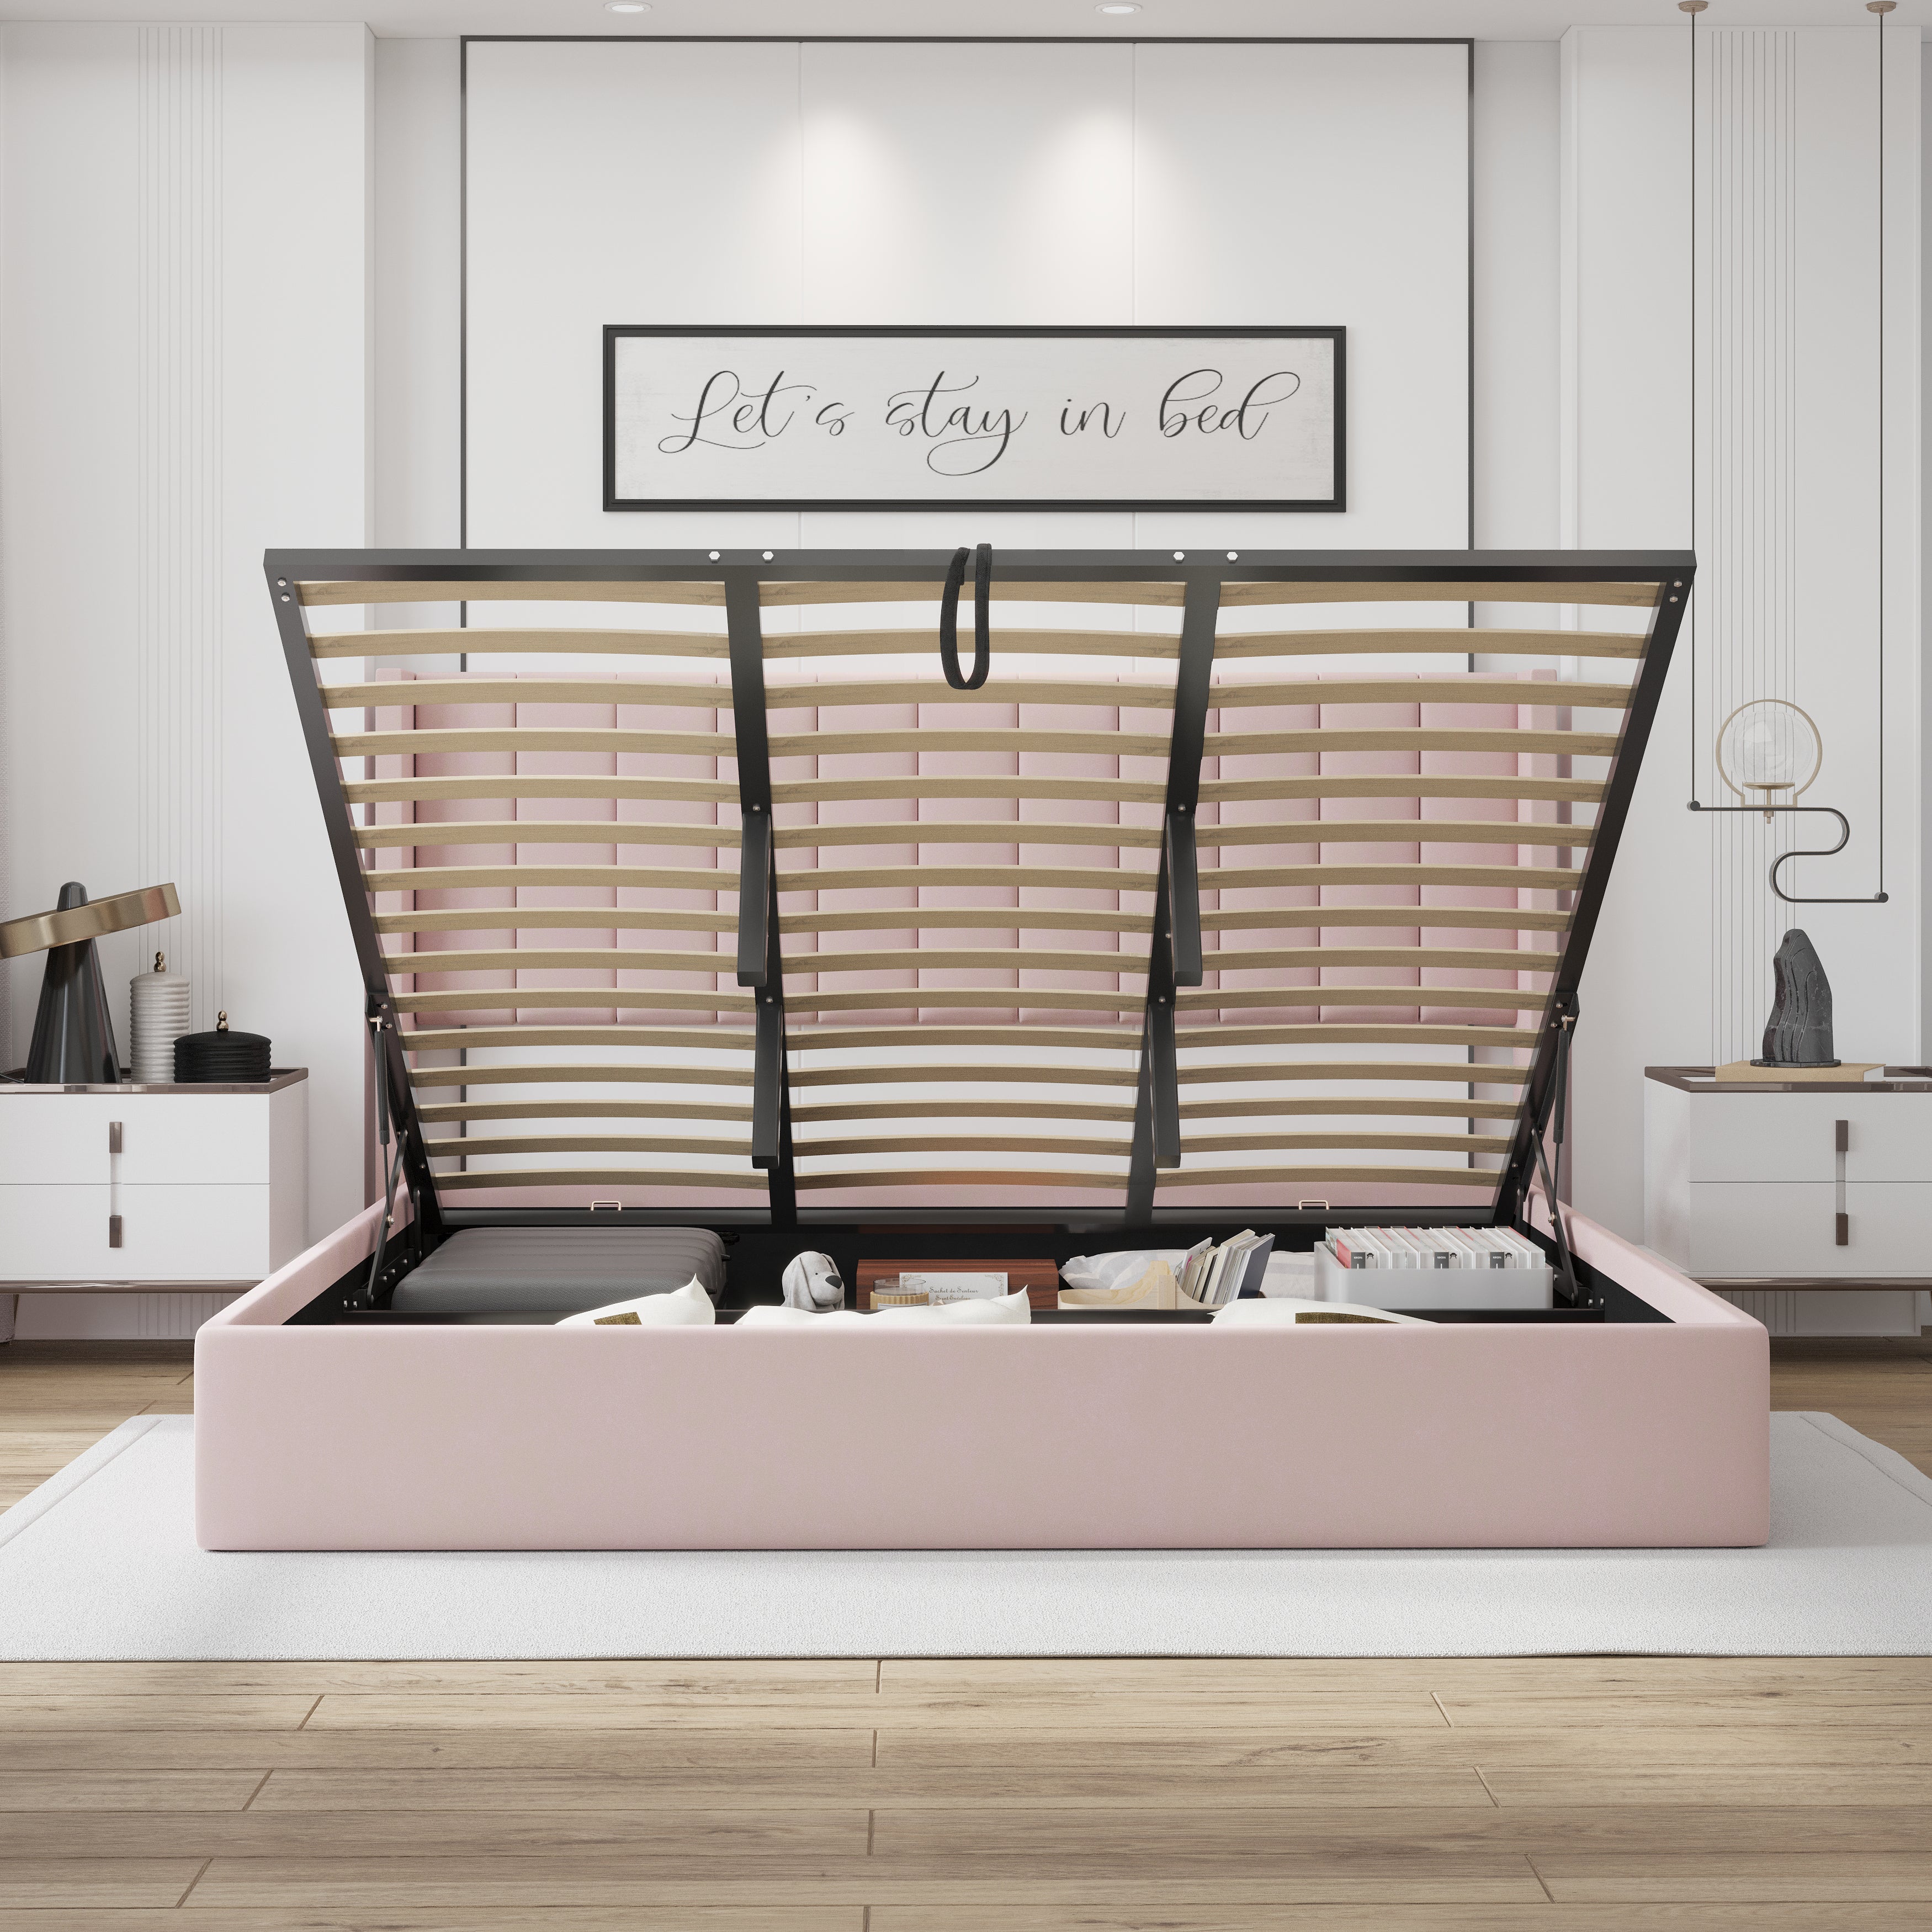 Velets Oliver Contemporary Mid-Century Soft Padded Upholstered Platform Storage Bed with Hydraulic Gas Lift Storage - Solid Wood Frame, Wood Slat System & Smart Hydraulic Under-Bed Storage - Pink